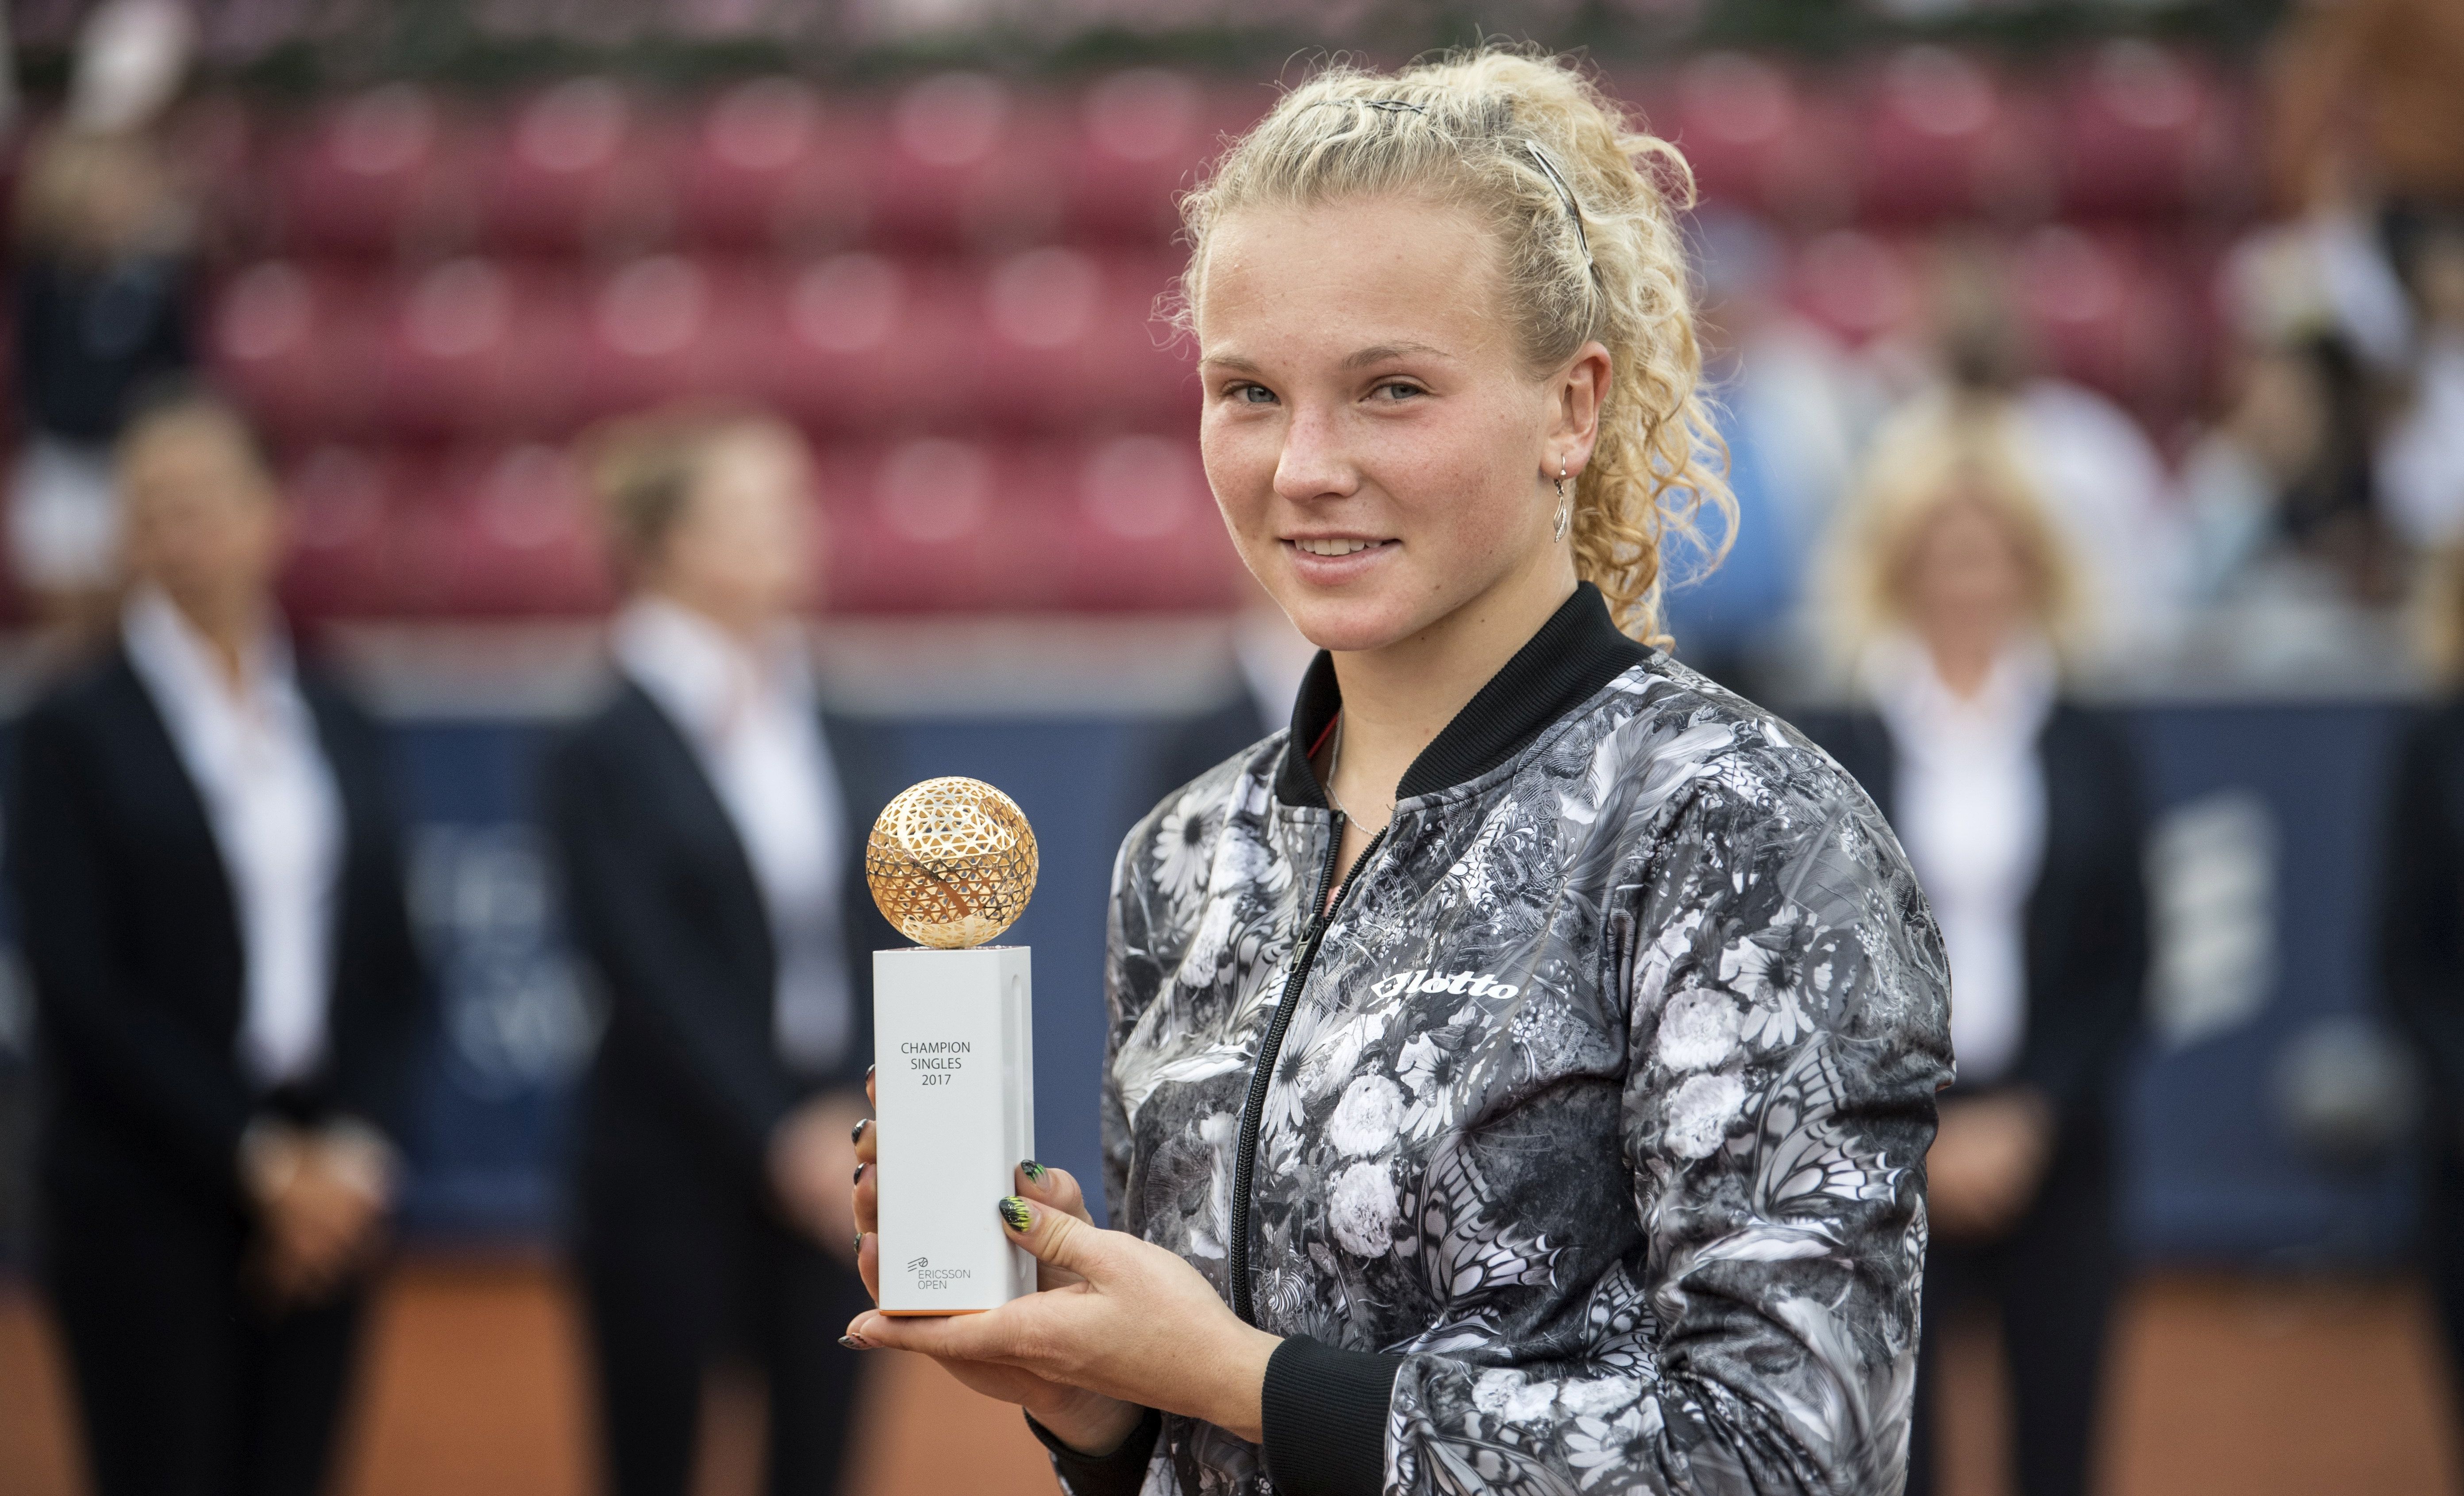 epa06117879 Katerina Siniakova of the Czech Republic poses with the trophy after winning the Swedish Open singles final against Caroline Wozniacki in Bastad, Sweden, 30 July 2017.  EPA/Bjorn Larsson Rosvall  SWEDEN OUT